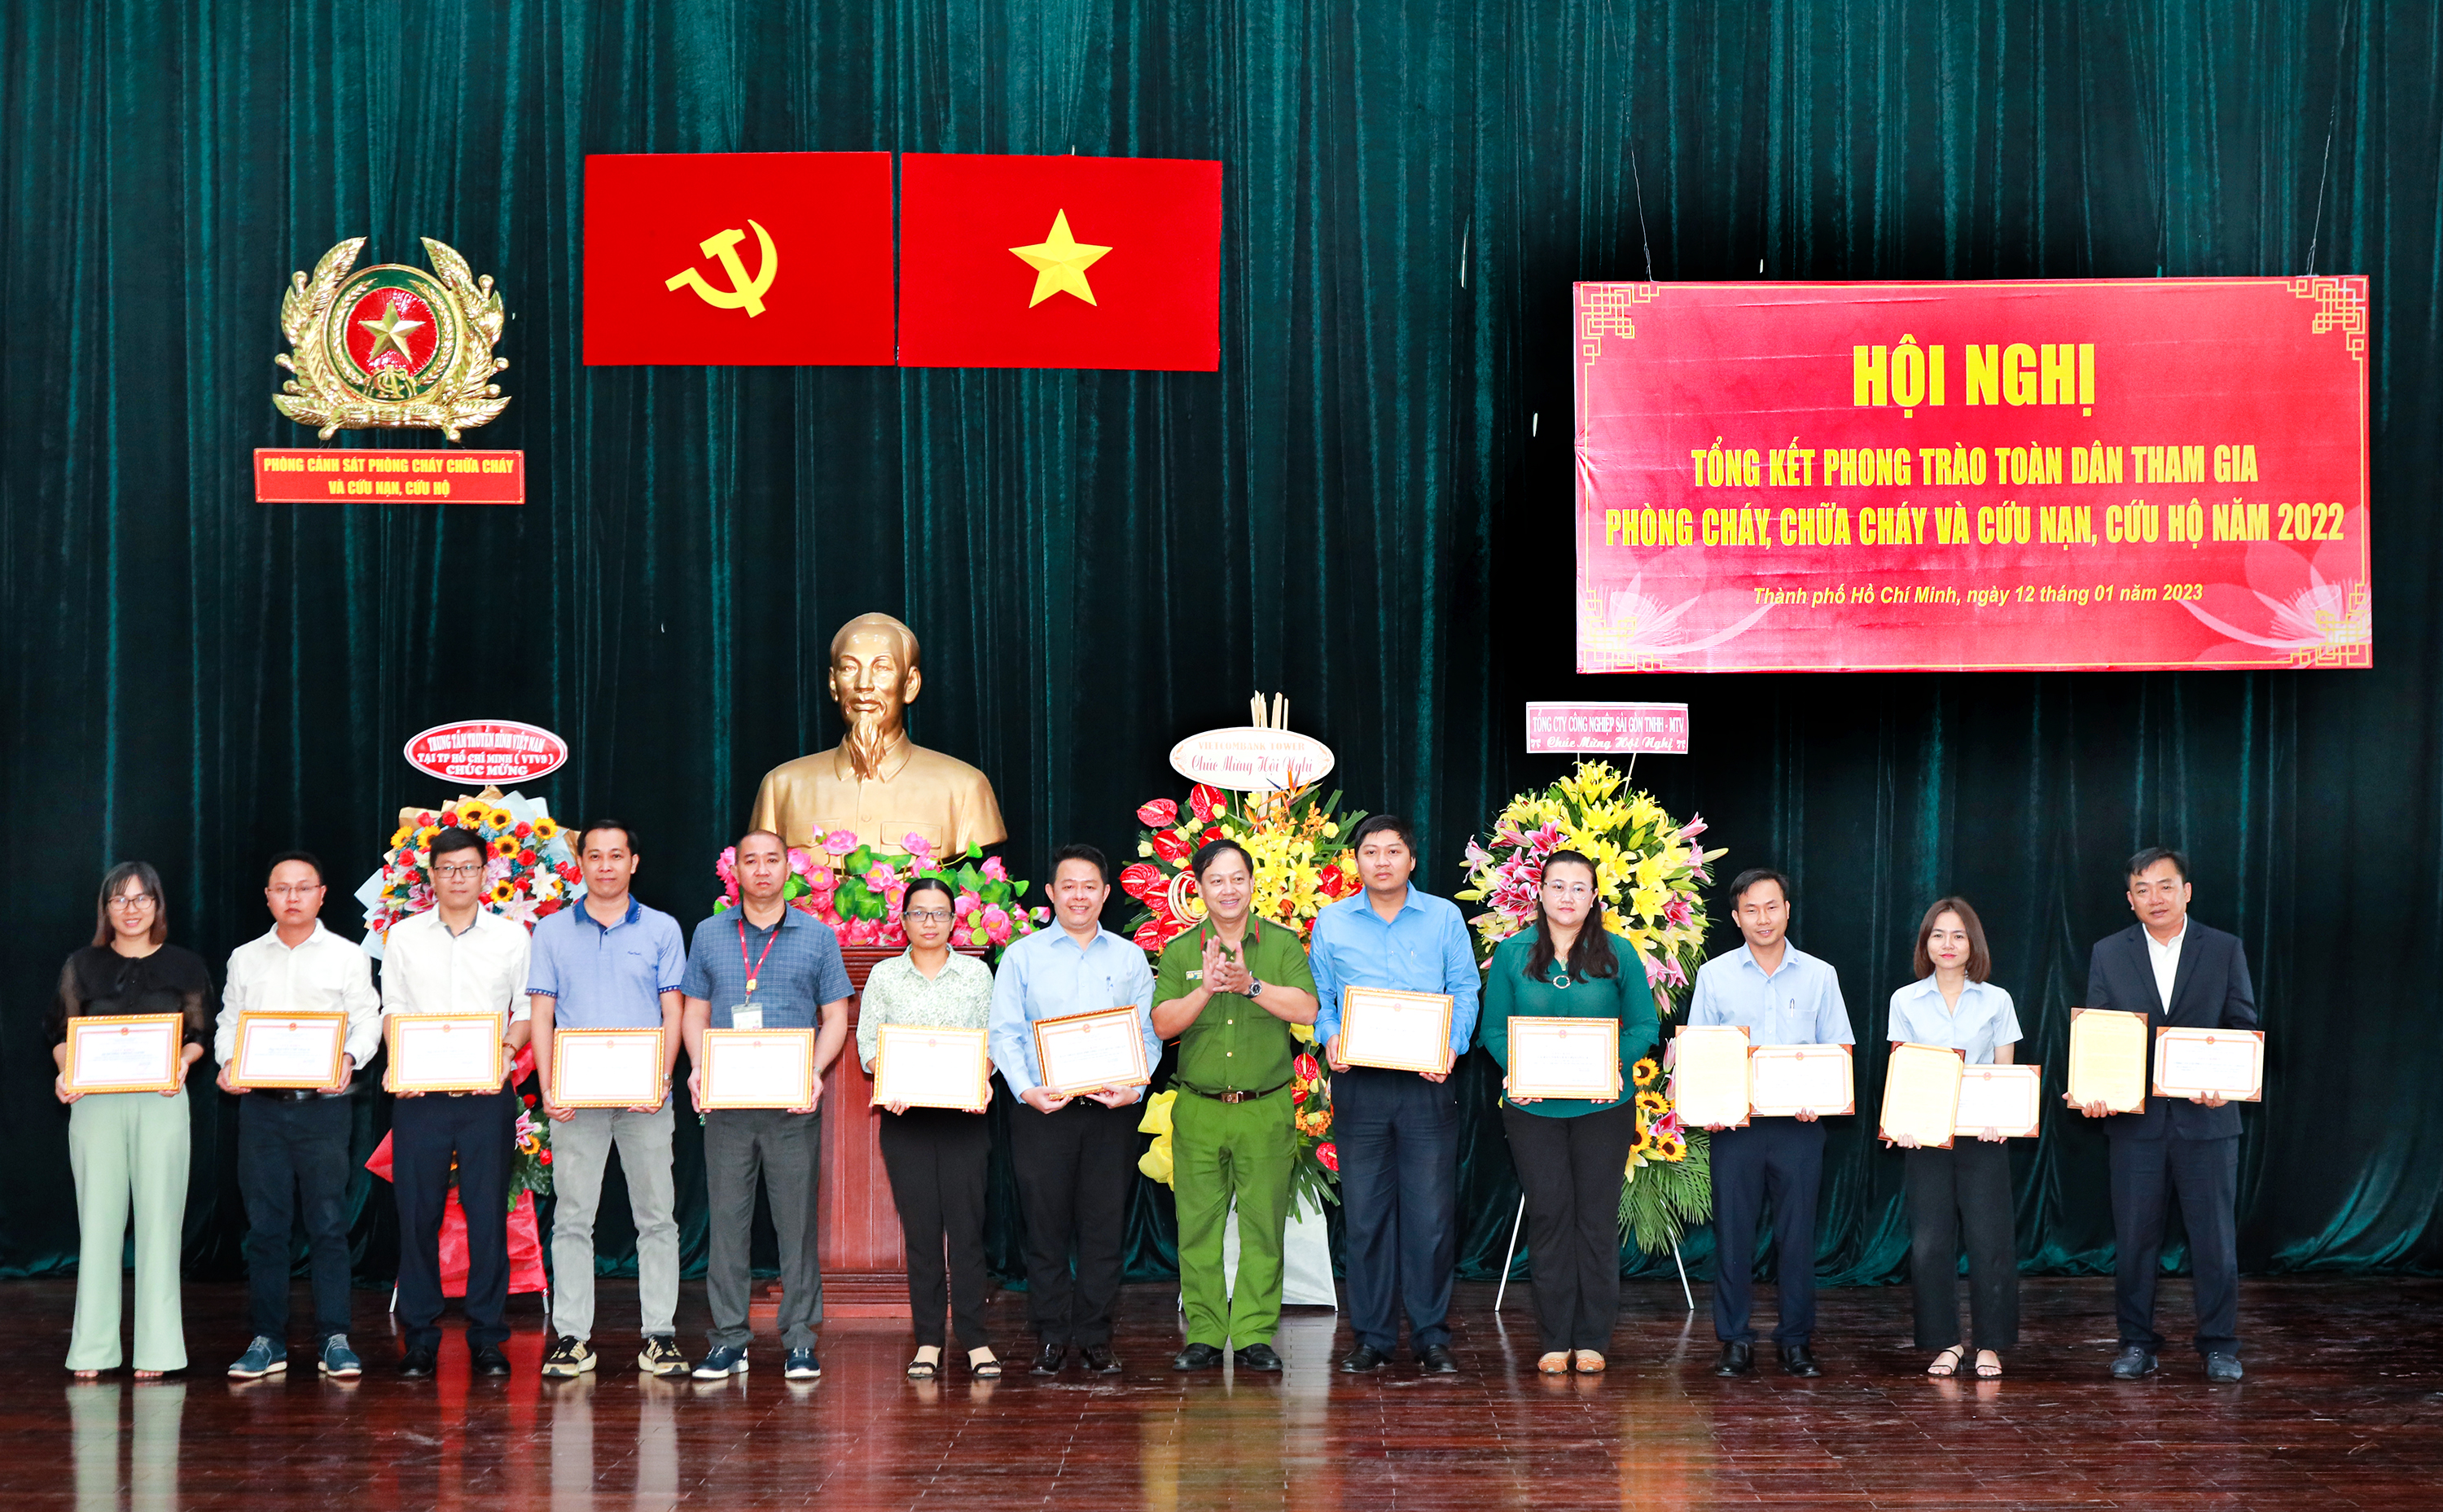 HO CHI MINH CITY PUBLIC SECURITY DEPARTMENT AWARDS HUNG THINH CORPORATION THE CERTIFICATE OF MERIT 